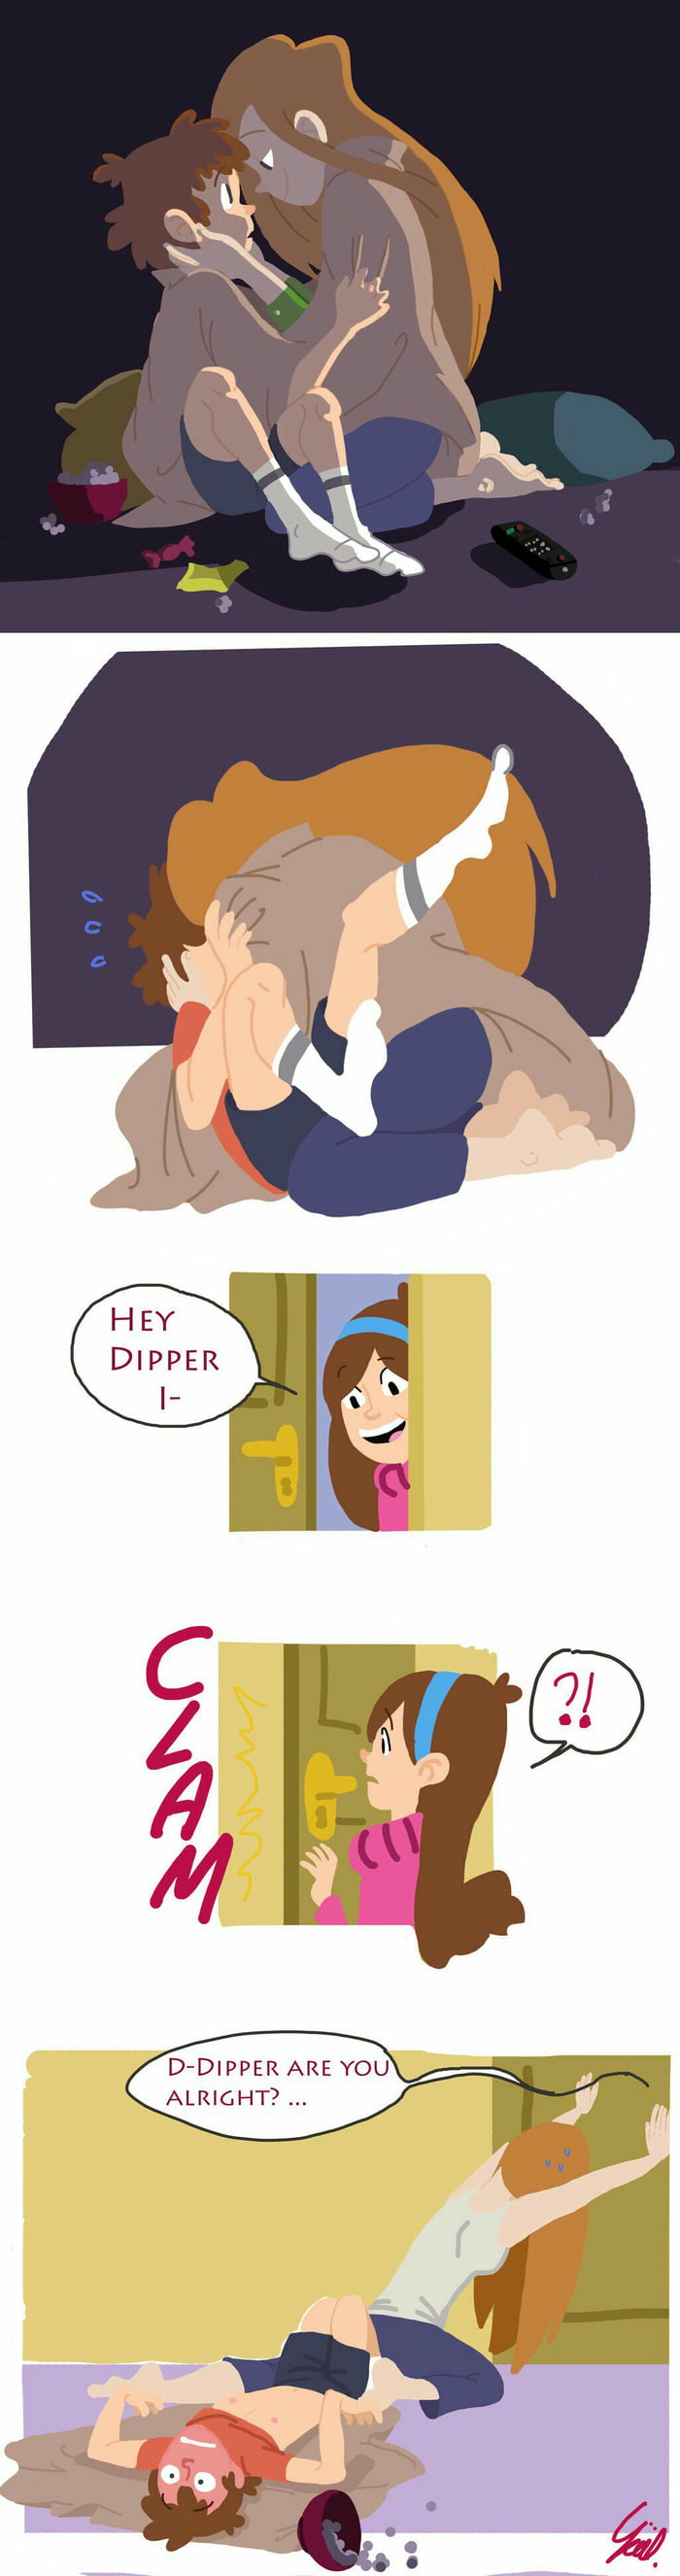 Dipper and wendy fanfiction